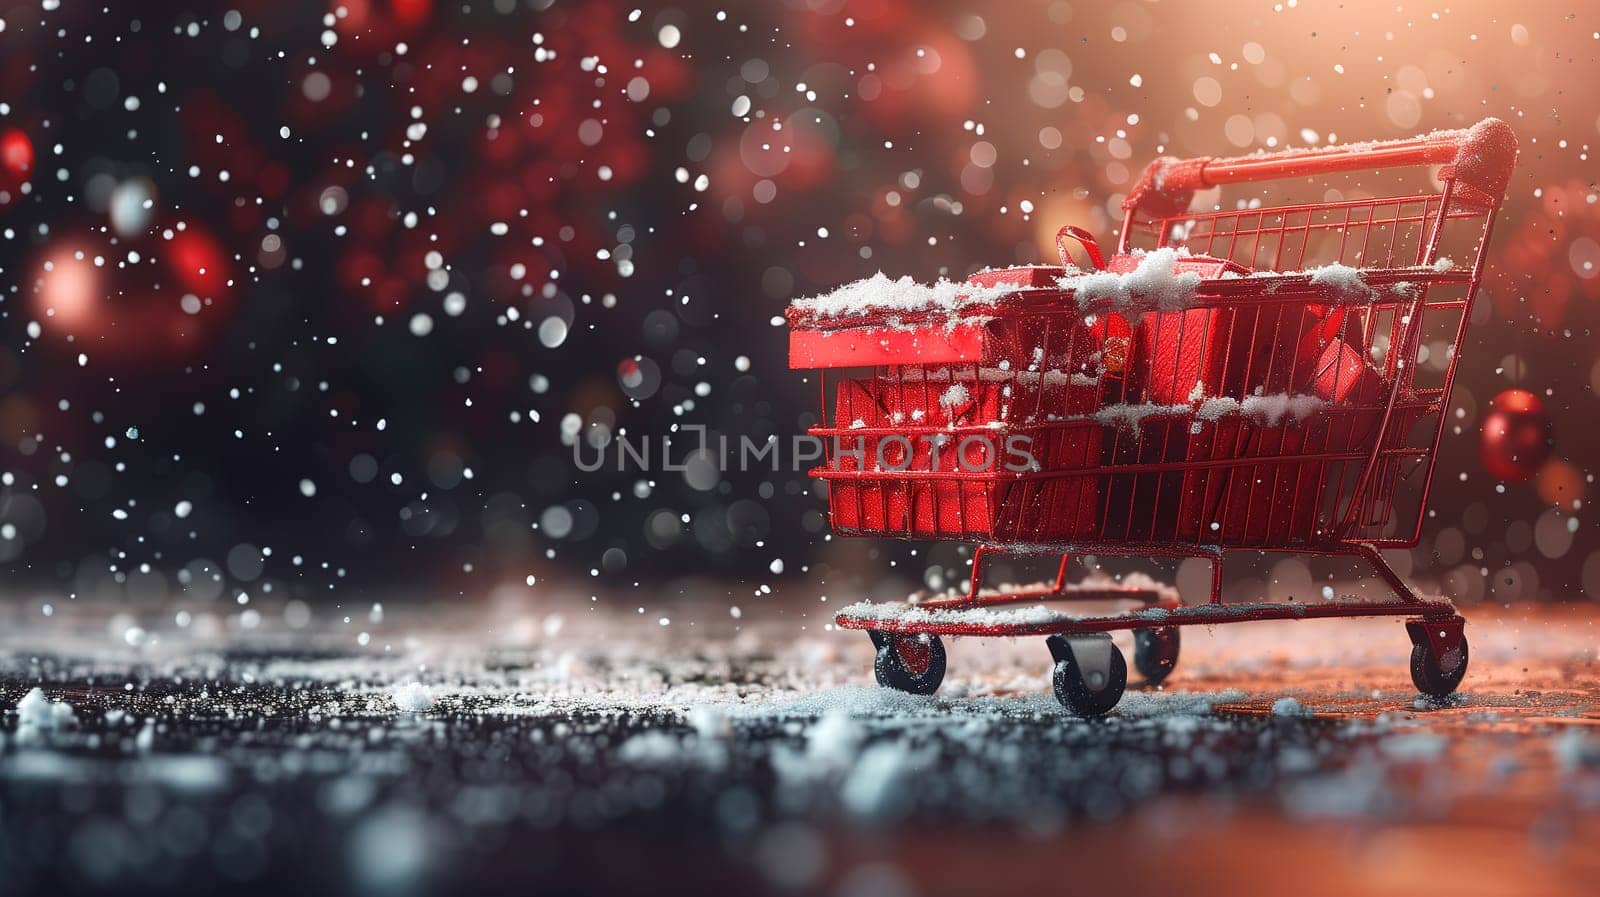 Red Shopping Cart in Snowy Setting by TRMK